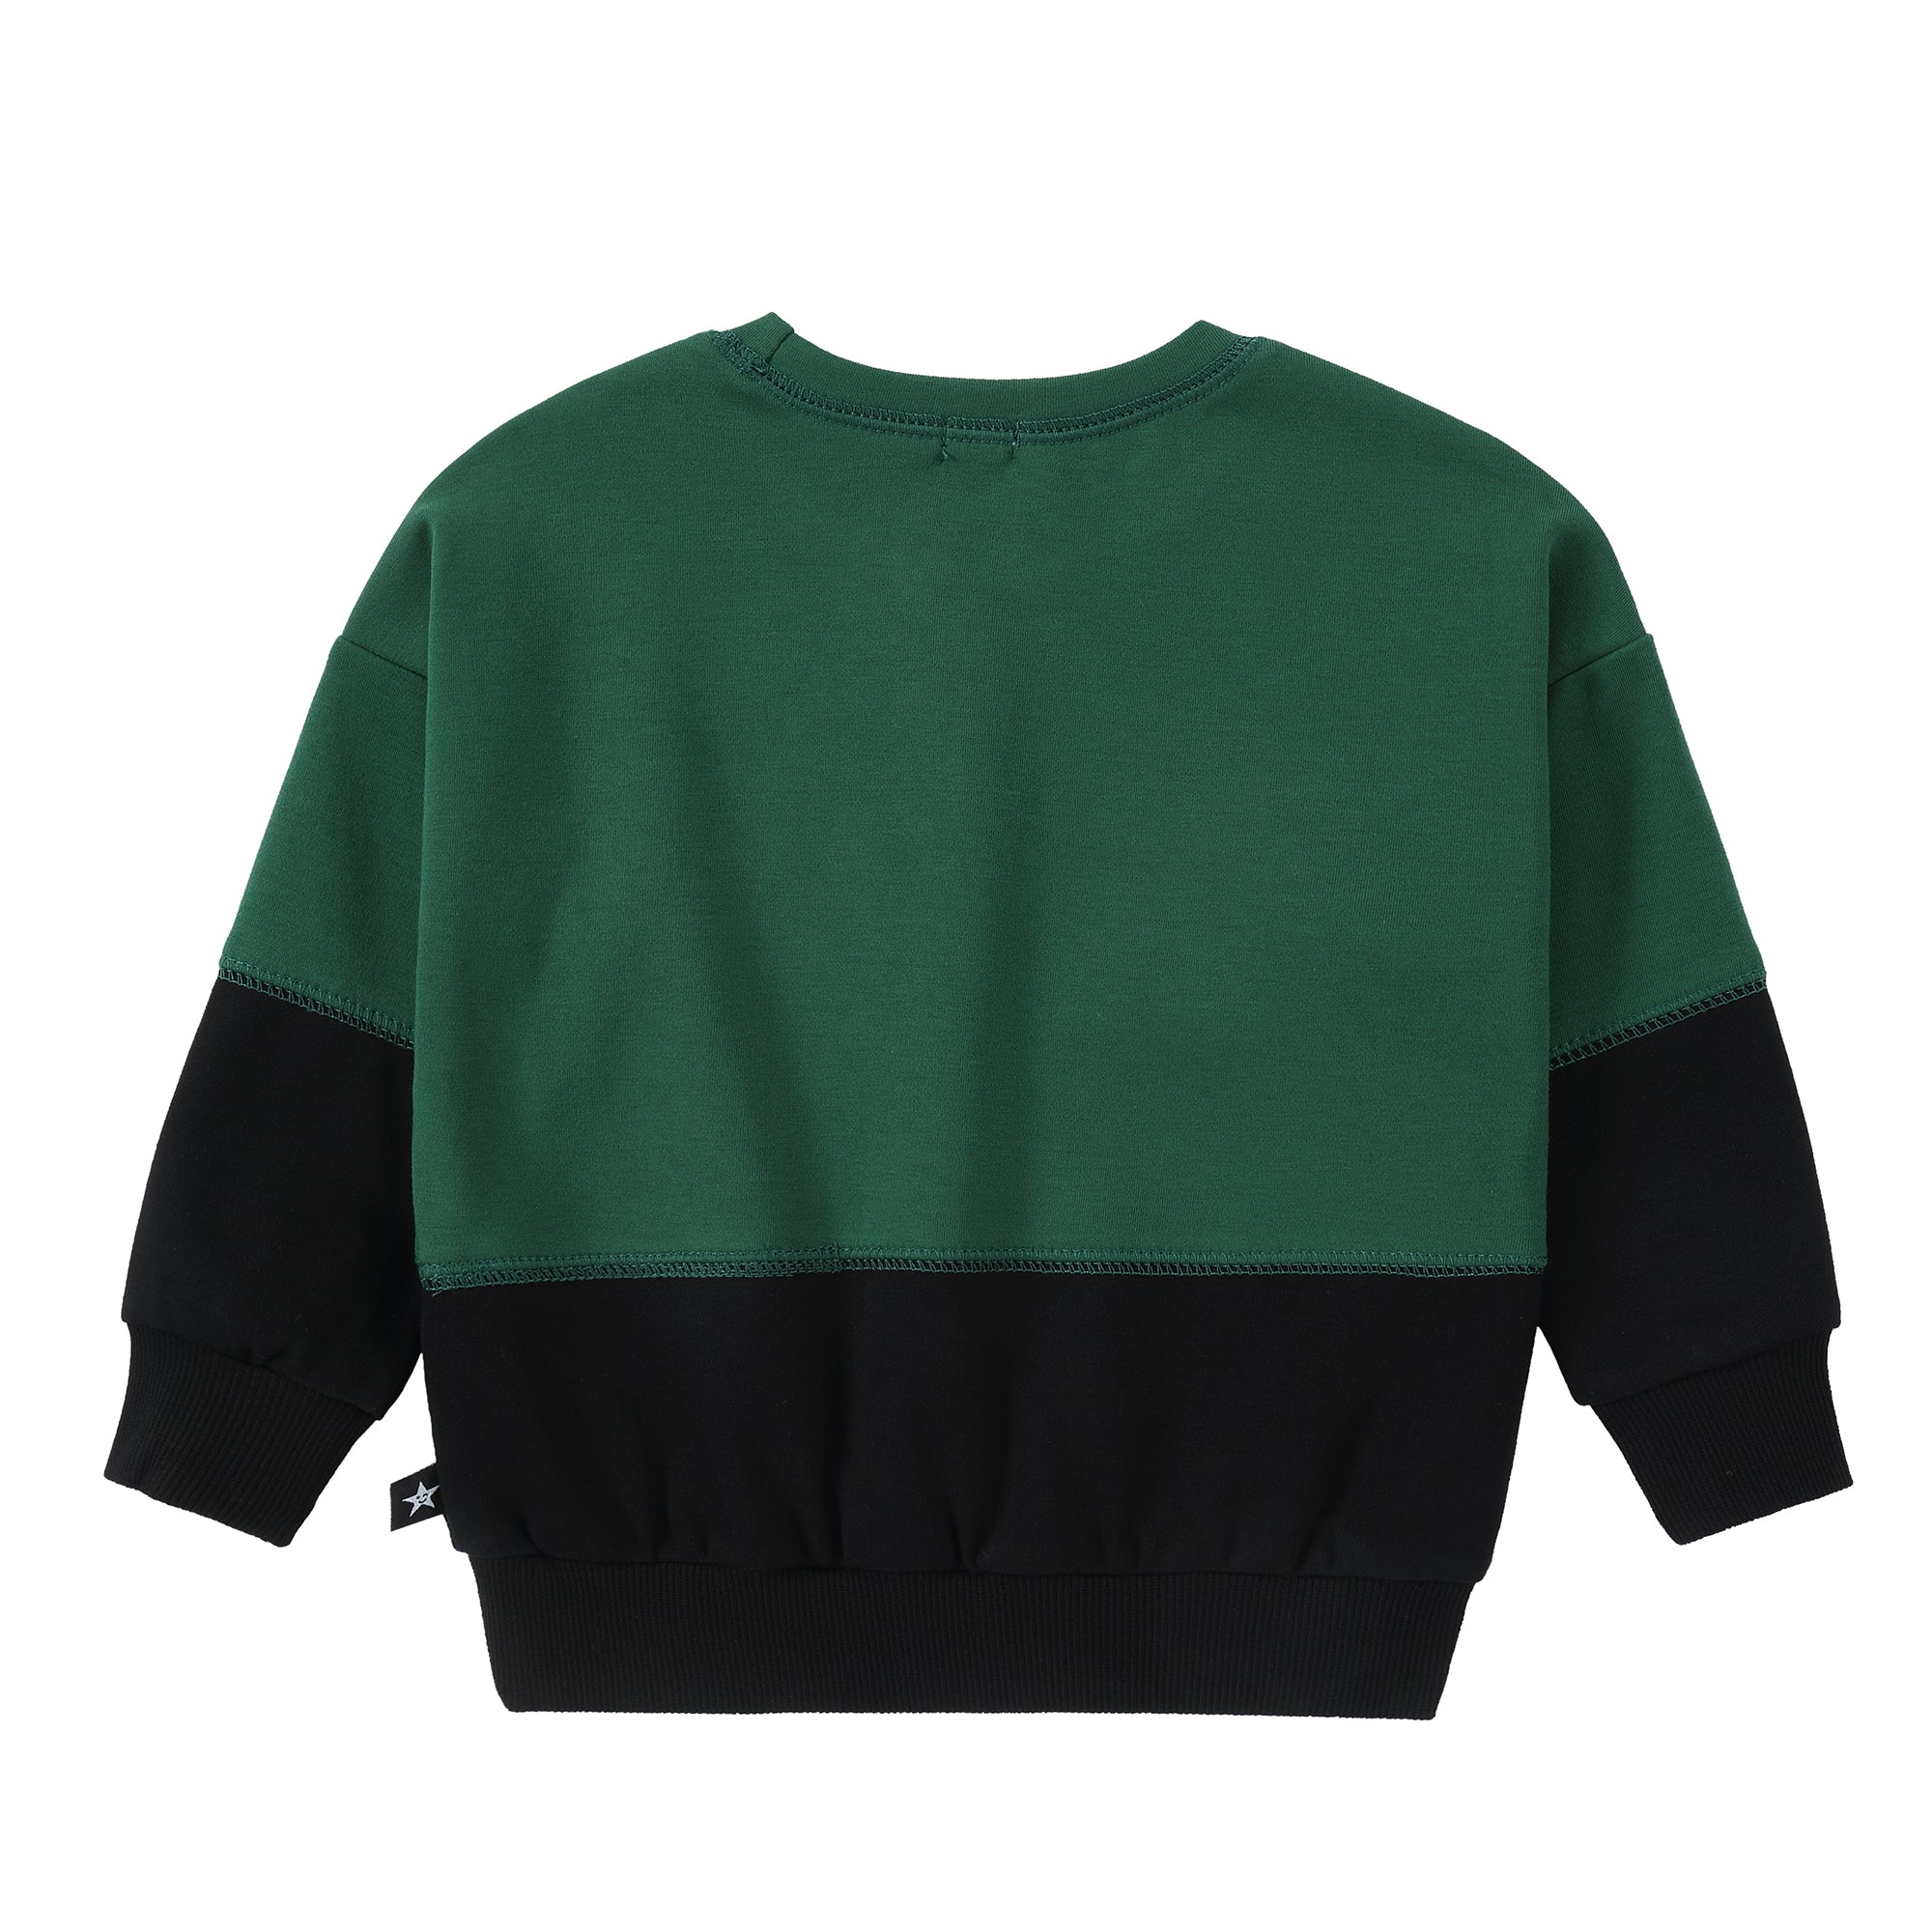 Green Colorblock Sweatshirt With Embroidery